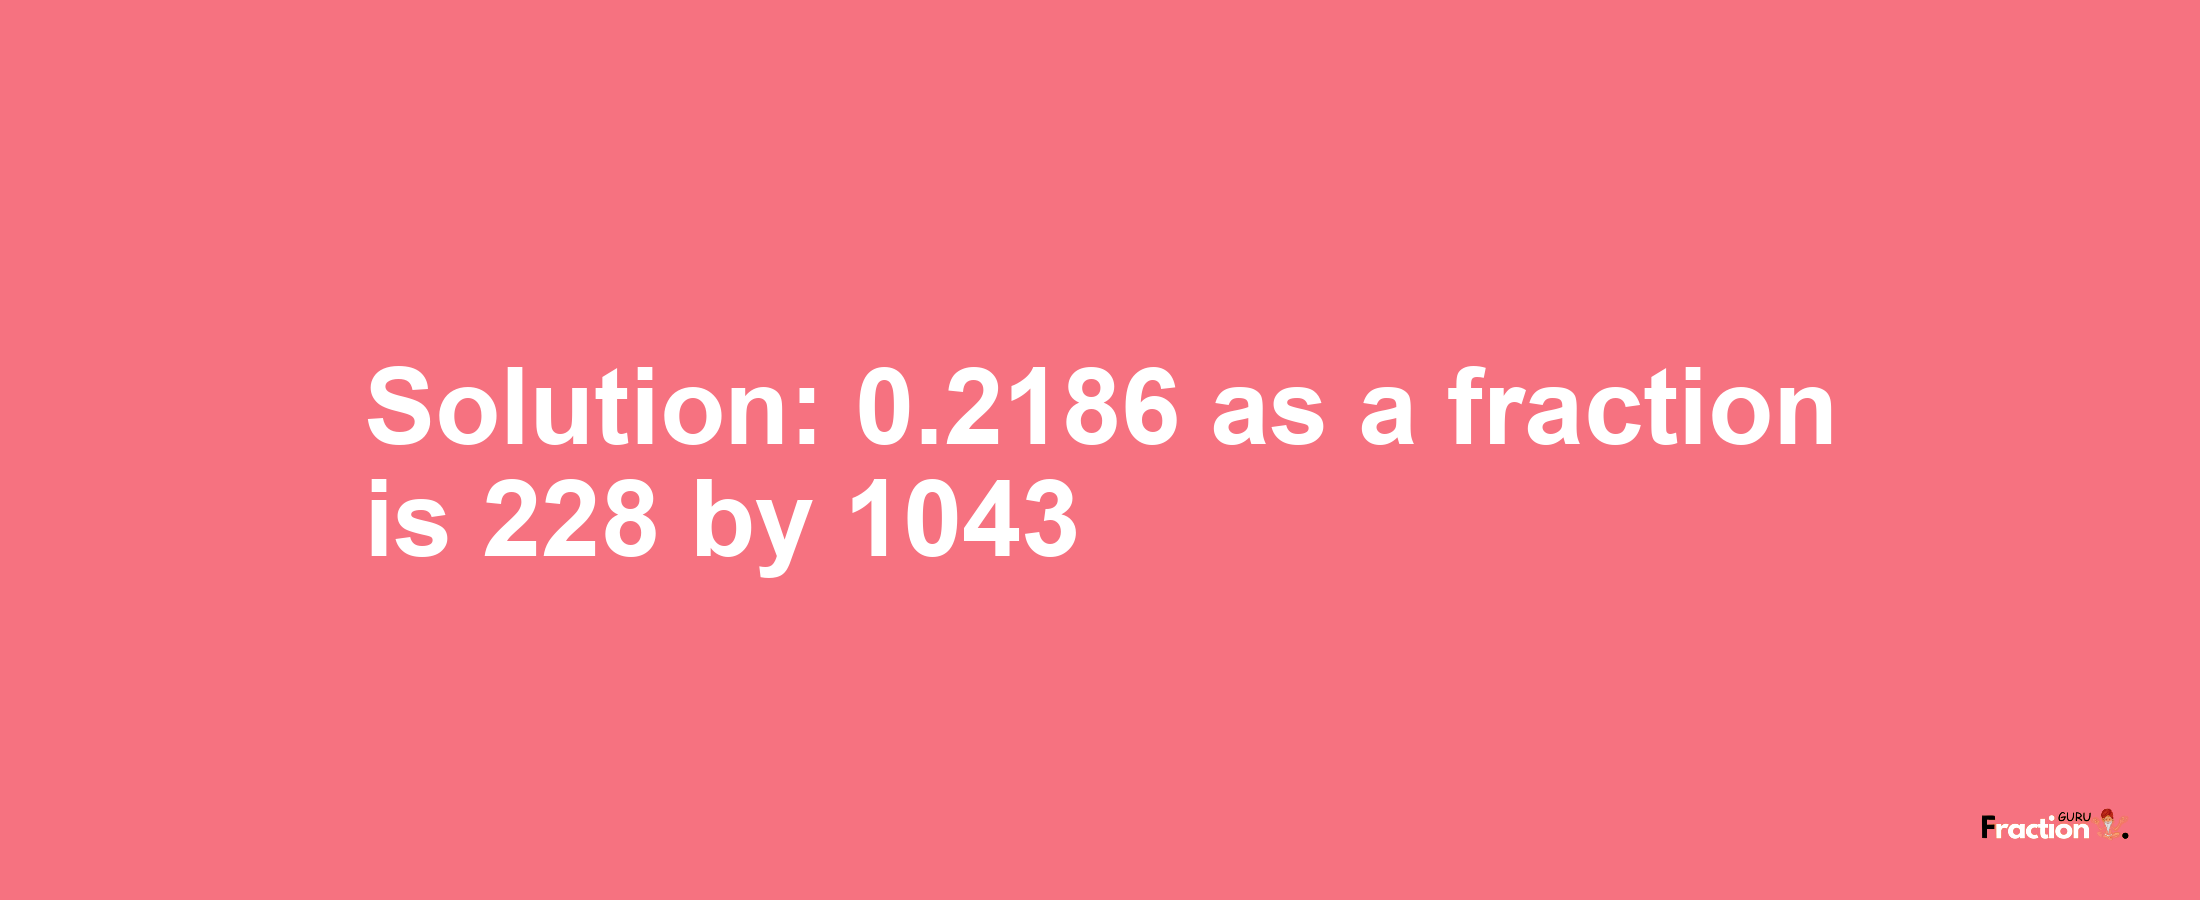 Solution:0.2186 as a fraction is 228/1043